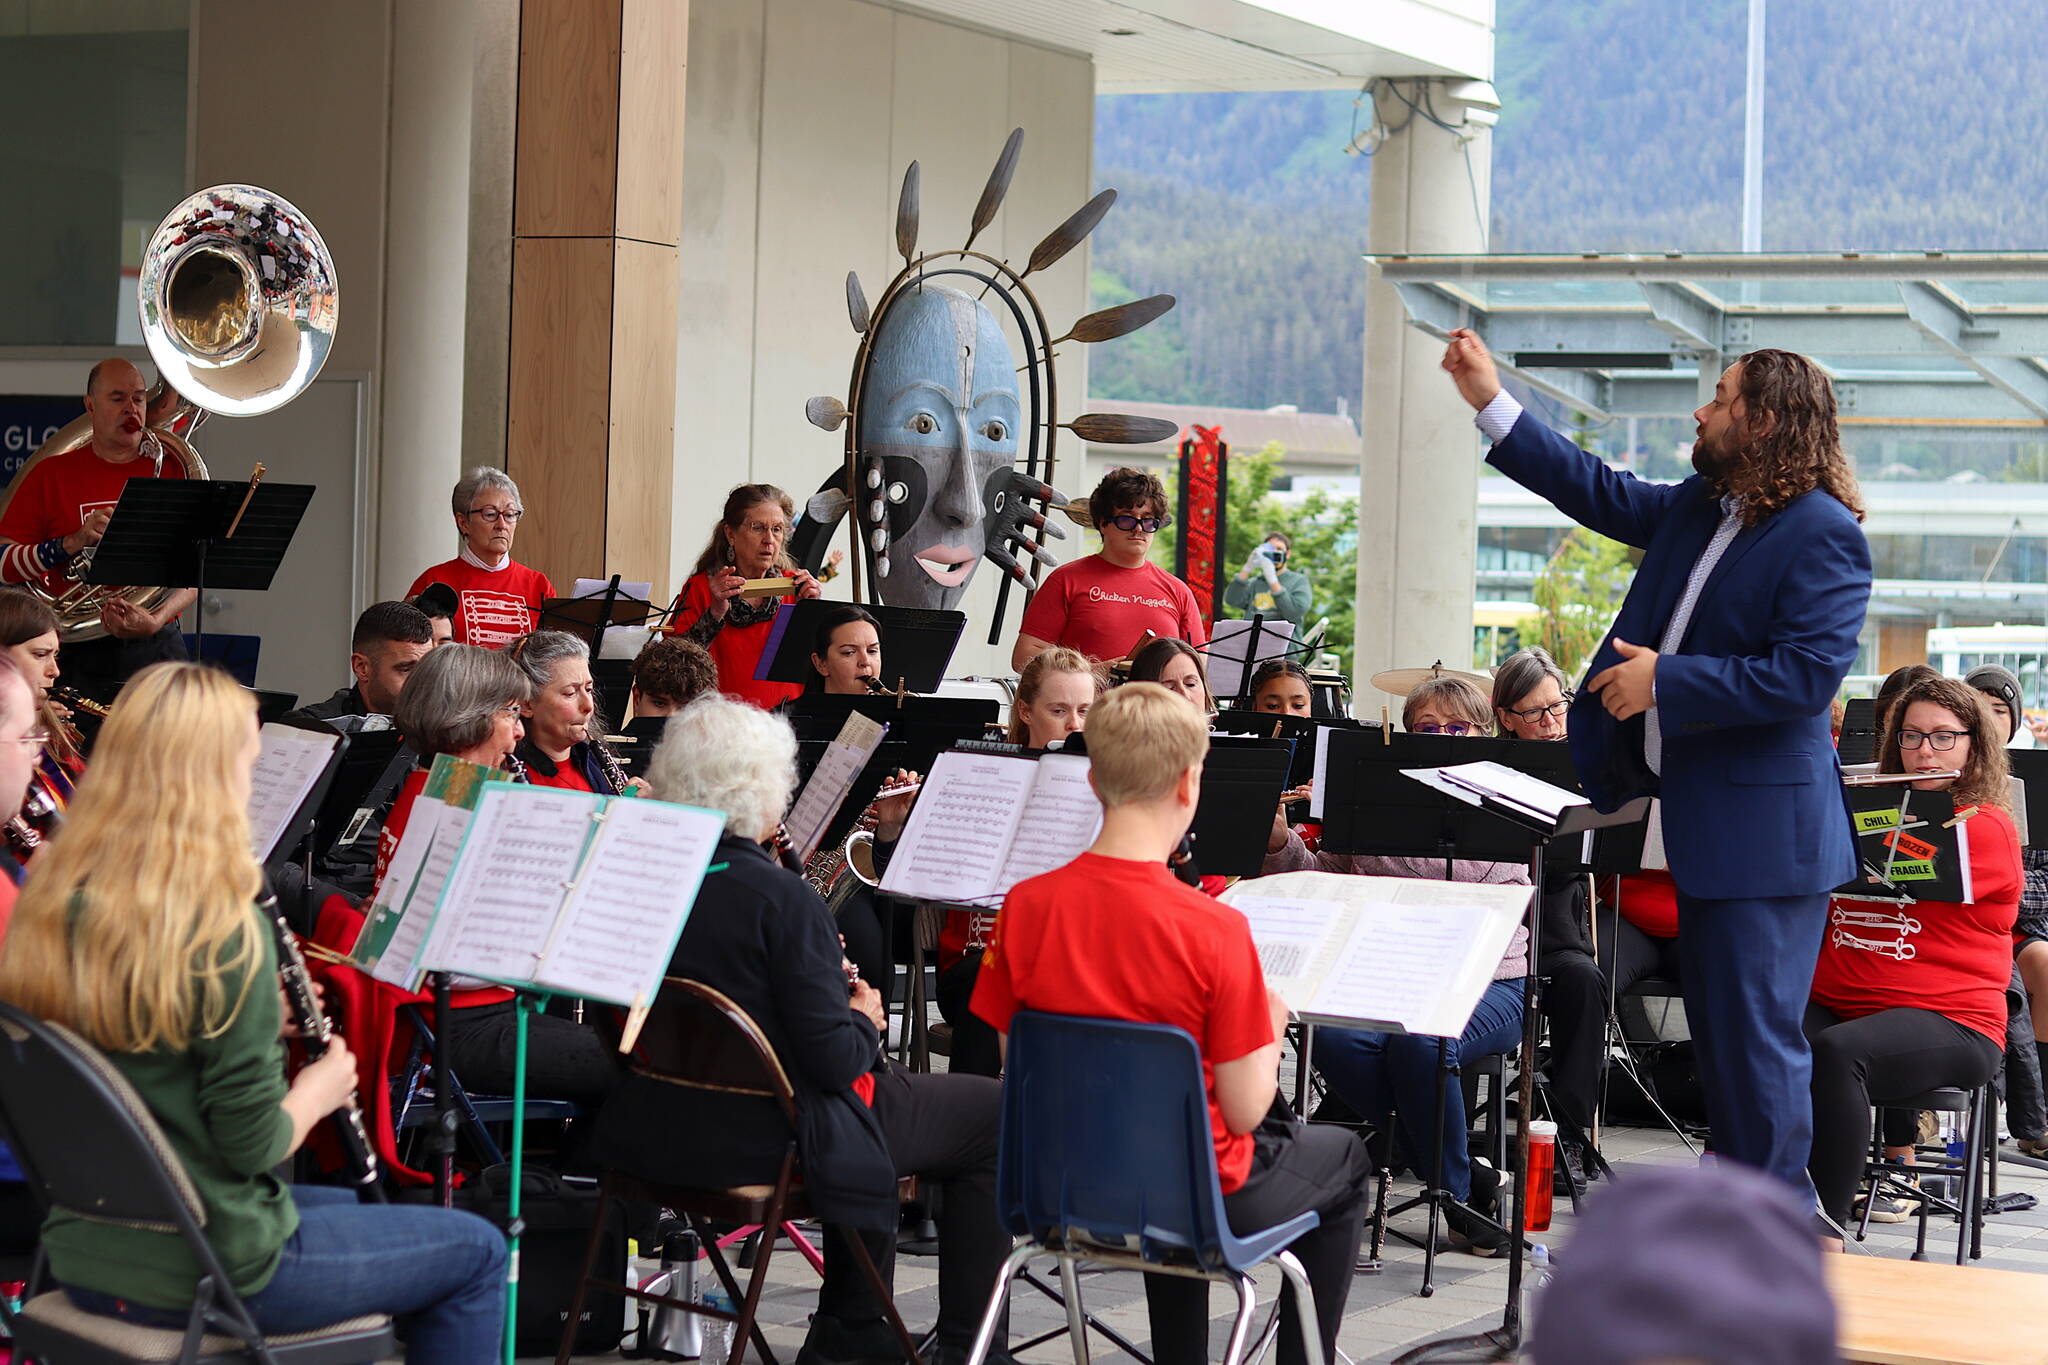 T.J. Hovest conducts the Juneau Volunteer Marching Band during an Independence Day weekend concert on Sunday at Sealaska Heritage Plaza. (Mark Sabbatini / Juneau Empire)